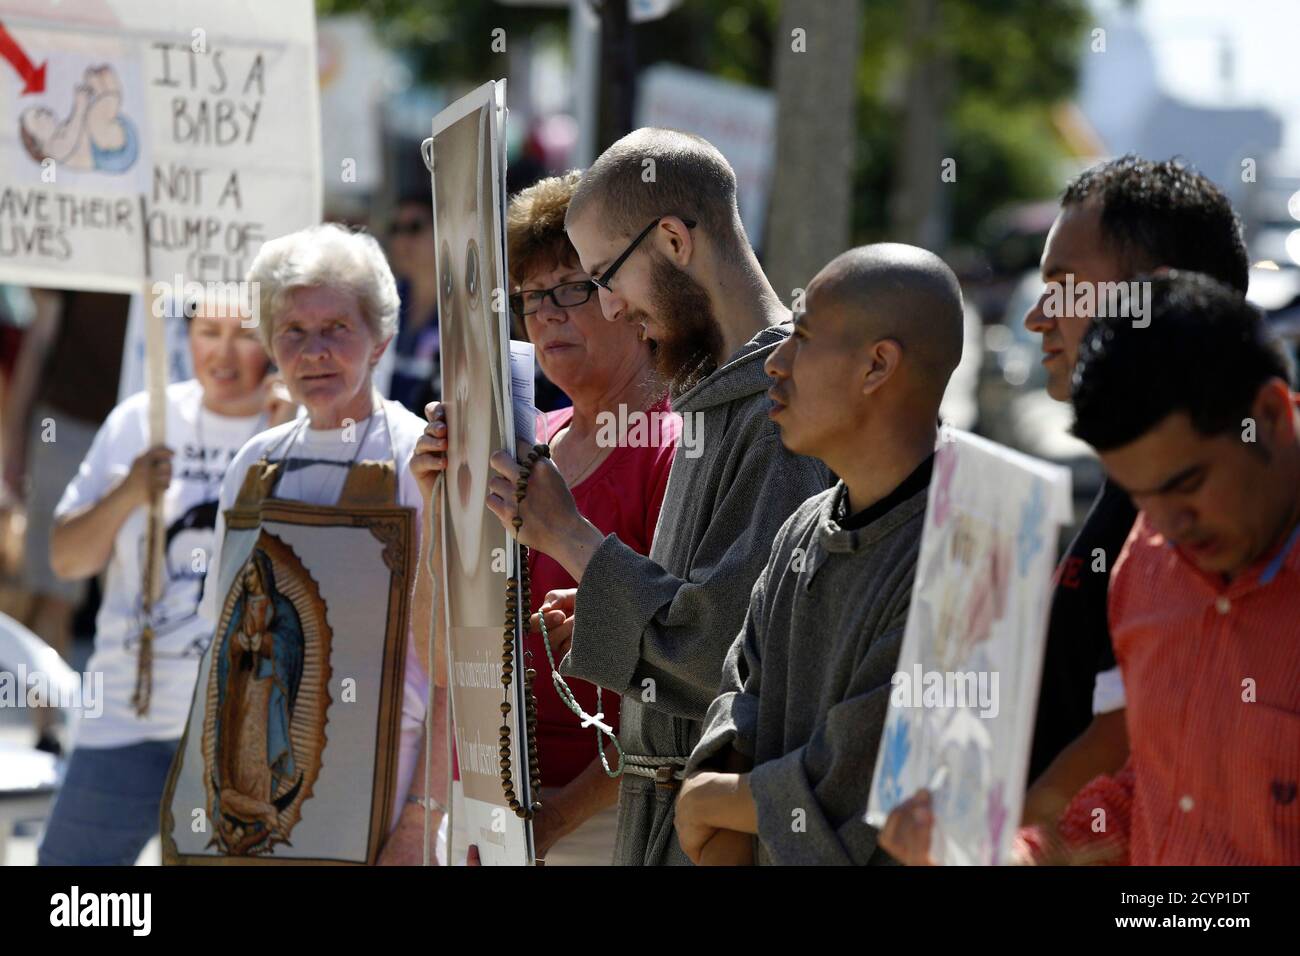 Abortion protesters stand in front of a Planned Parenthood clinic in Boston, Massachusetts, June 28, 2014. Massachusetts is beefing up security around abortion clinics and scrambling for a legal fix after the U.S. Supreme Court voided the state's buffer zone law that kept protesters 35 feet away, saying it violated freedom of speech. Boston, Worcester and Springfield, the state's largest cities, have deployed extra police to clinics, and abortion-provider Planned Parenthood said it was training new 'patient escorts' to help women through protests if needed. REUTERS/Dominick Reuter  (UNITED STA Stock Photo